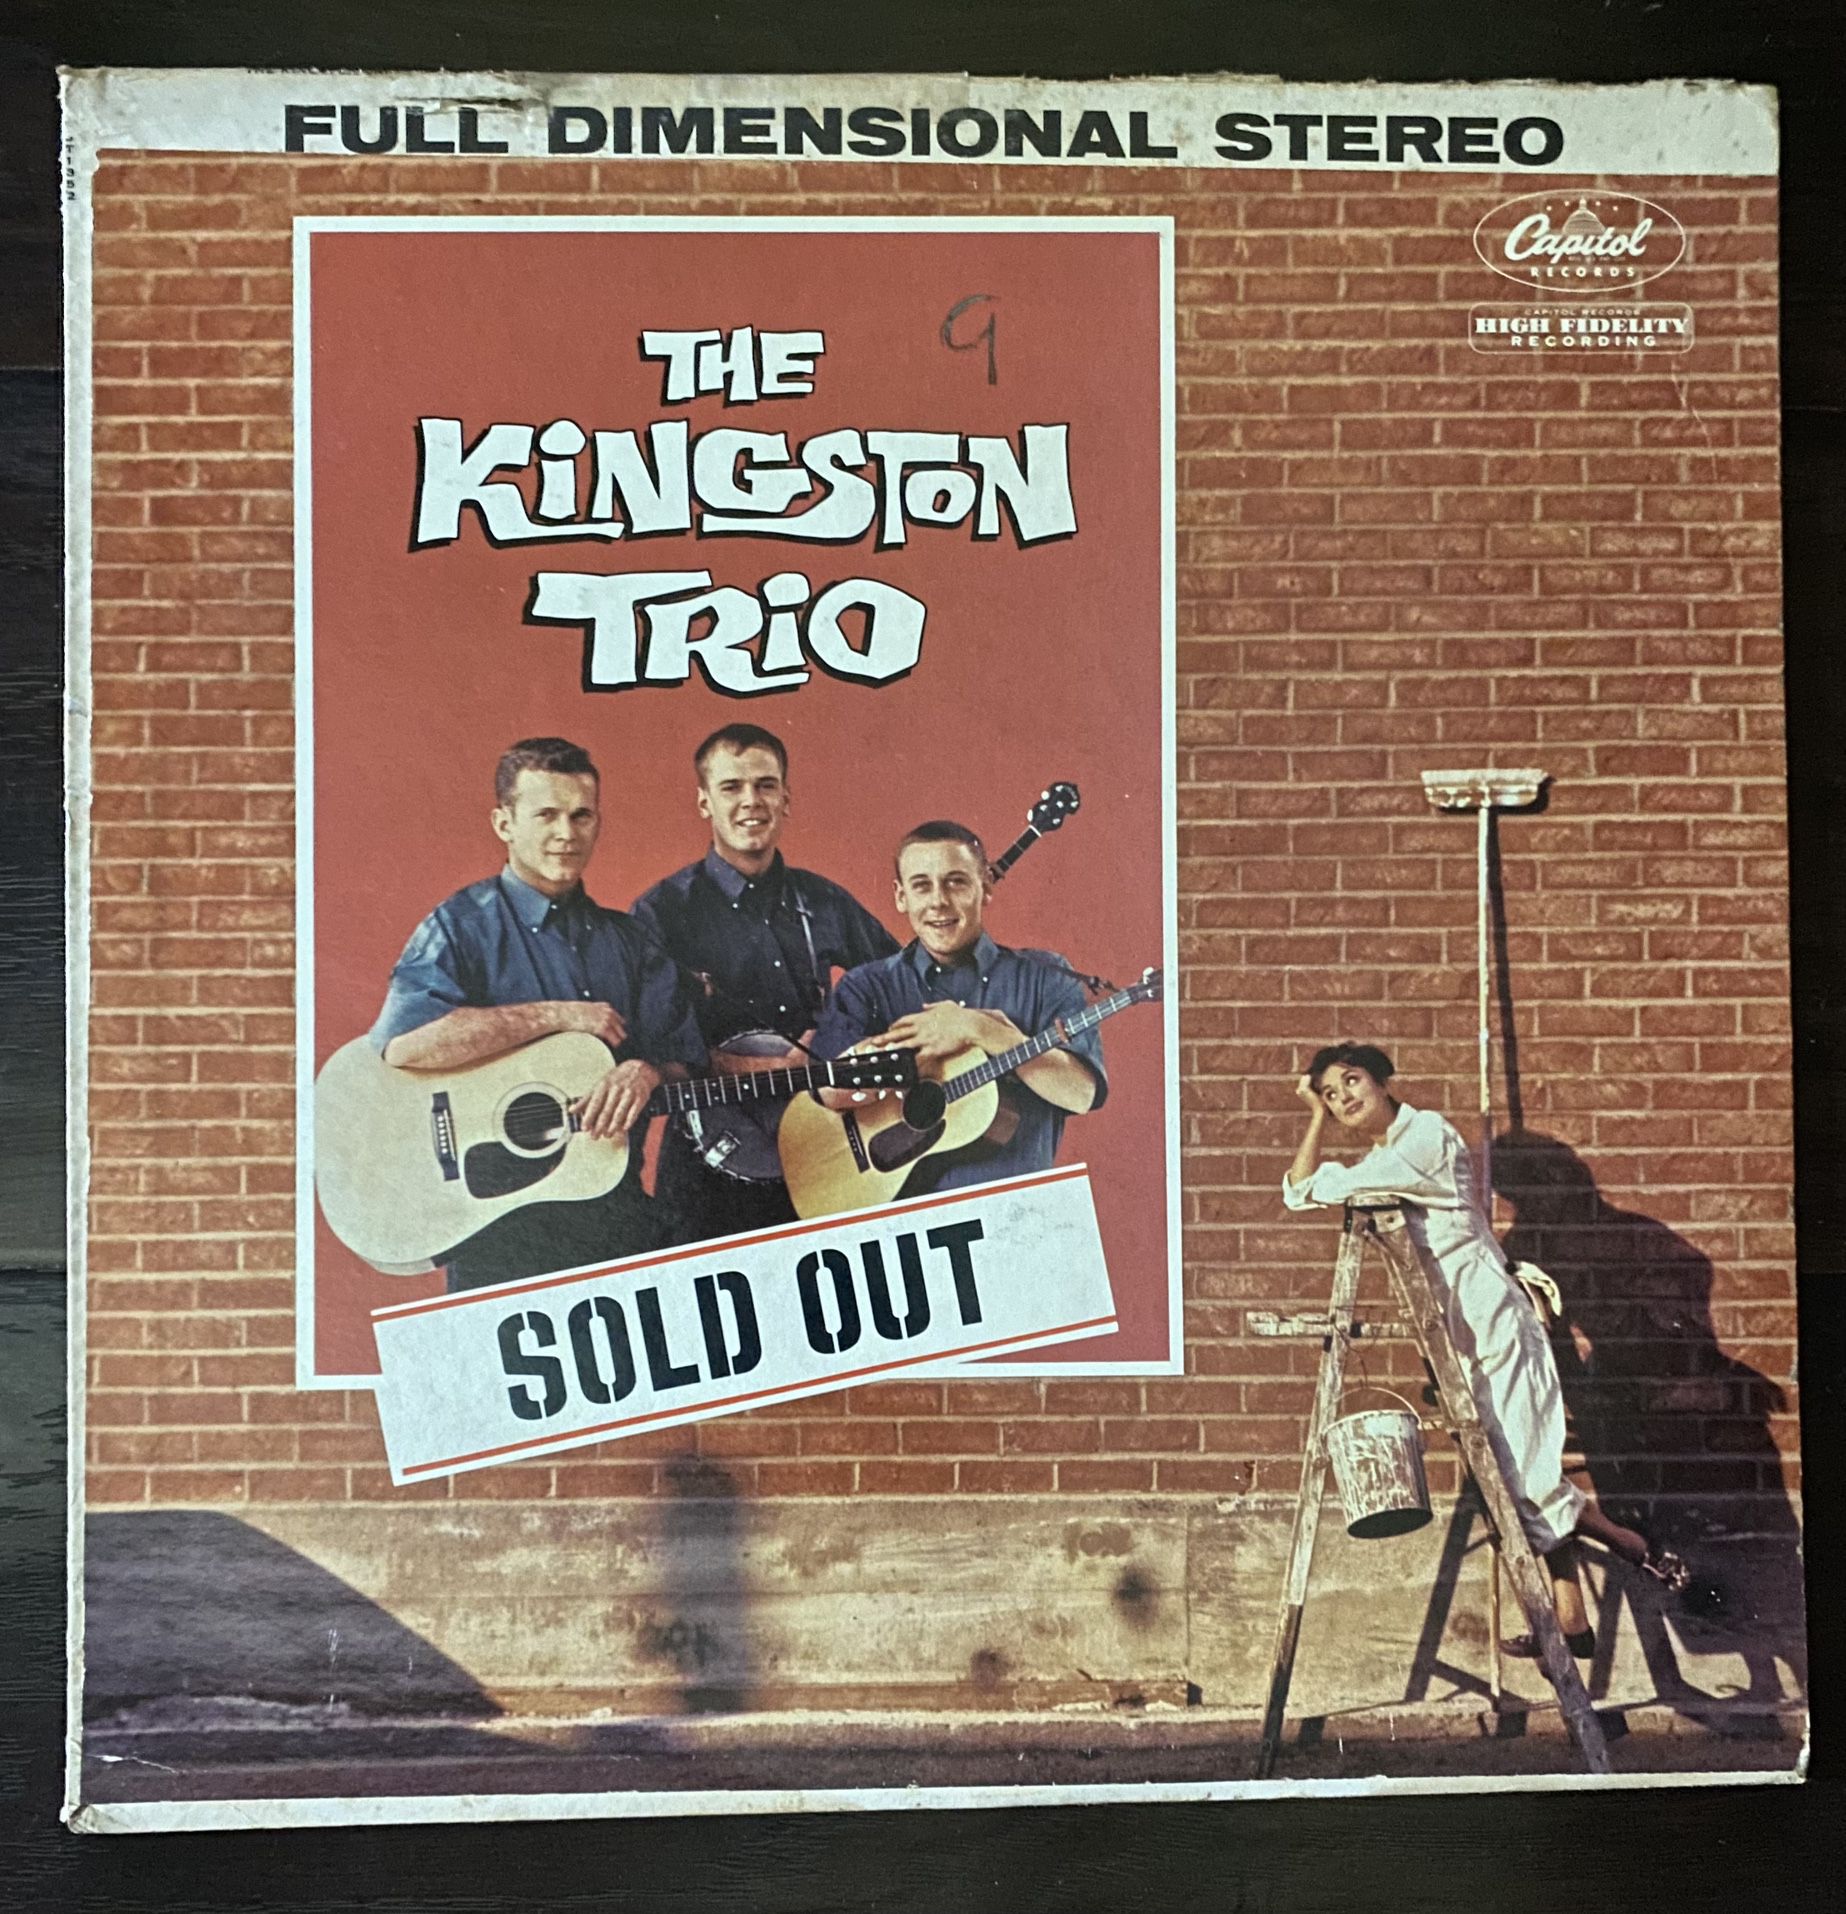 The Kingston Trio "Sold Out" 1960 Capitol ST 1352 "Raspberries Strawberries" NM Vinyl Record Vintage 